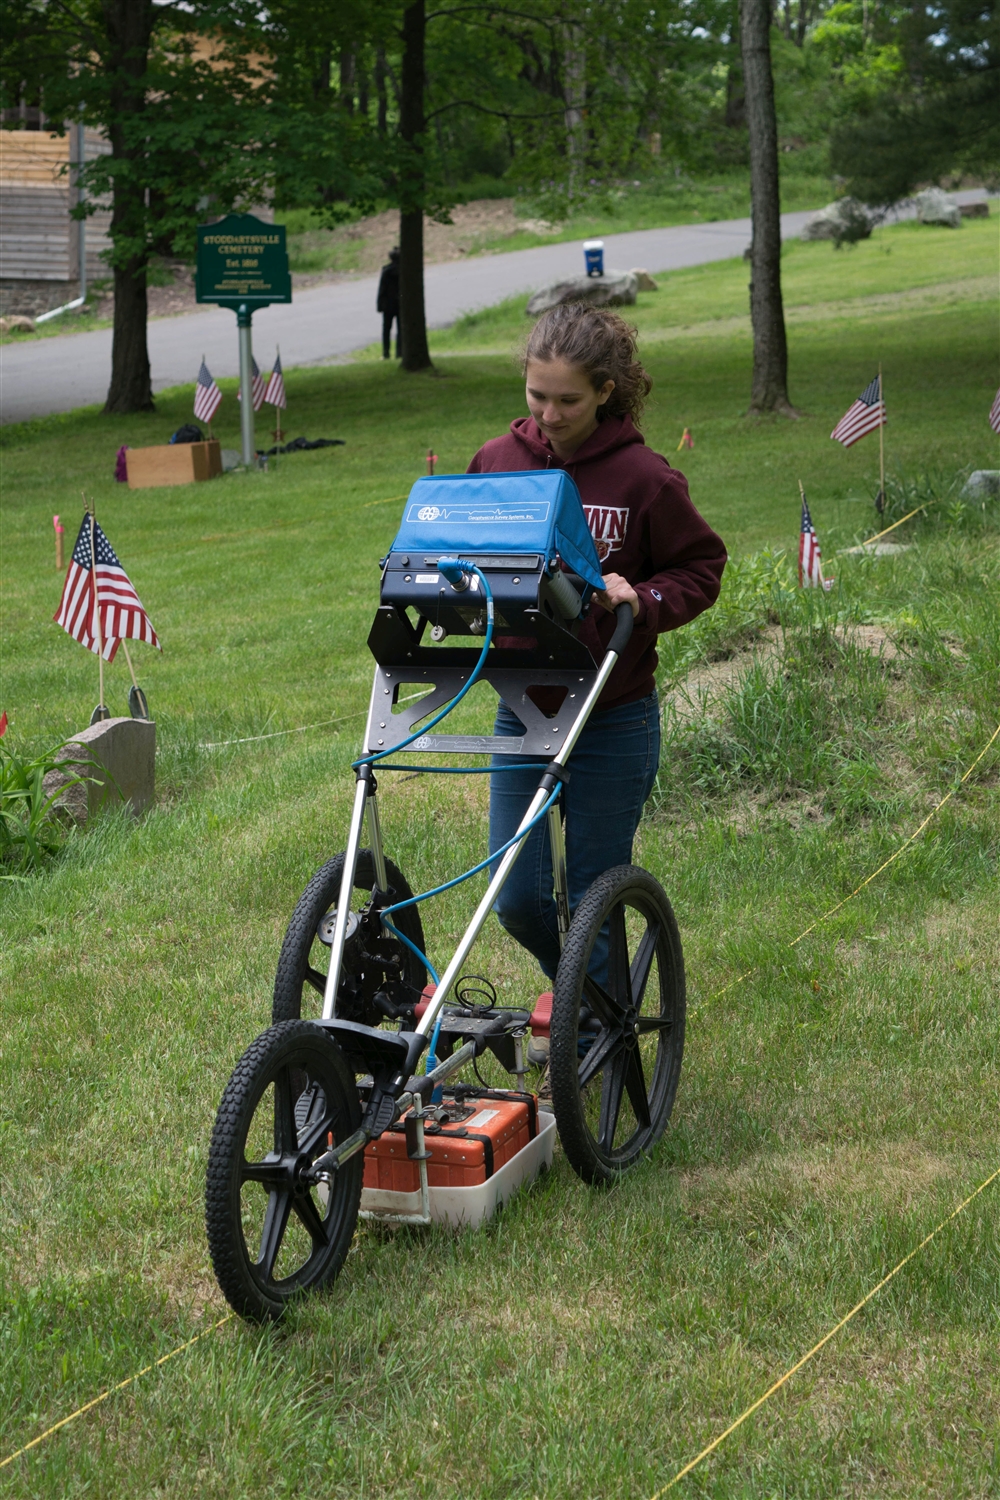 Student pushing a cart with a scanning computer through a field